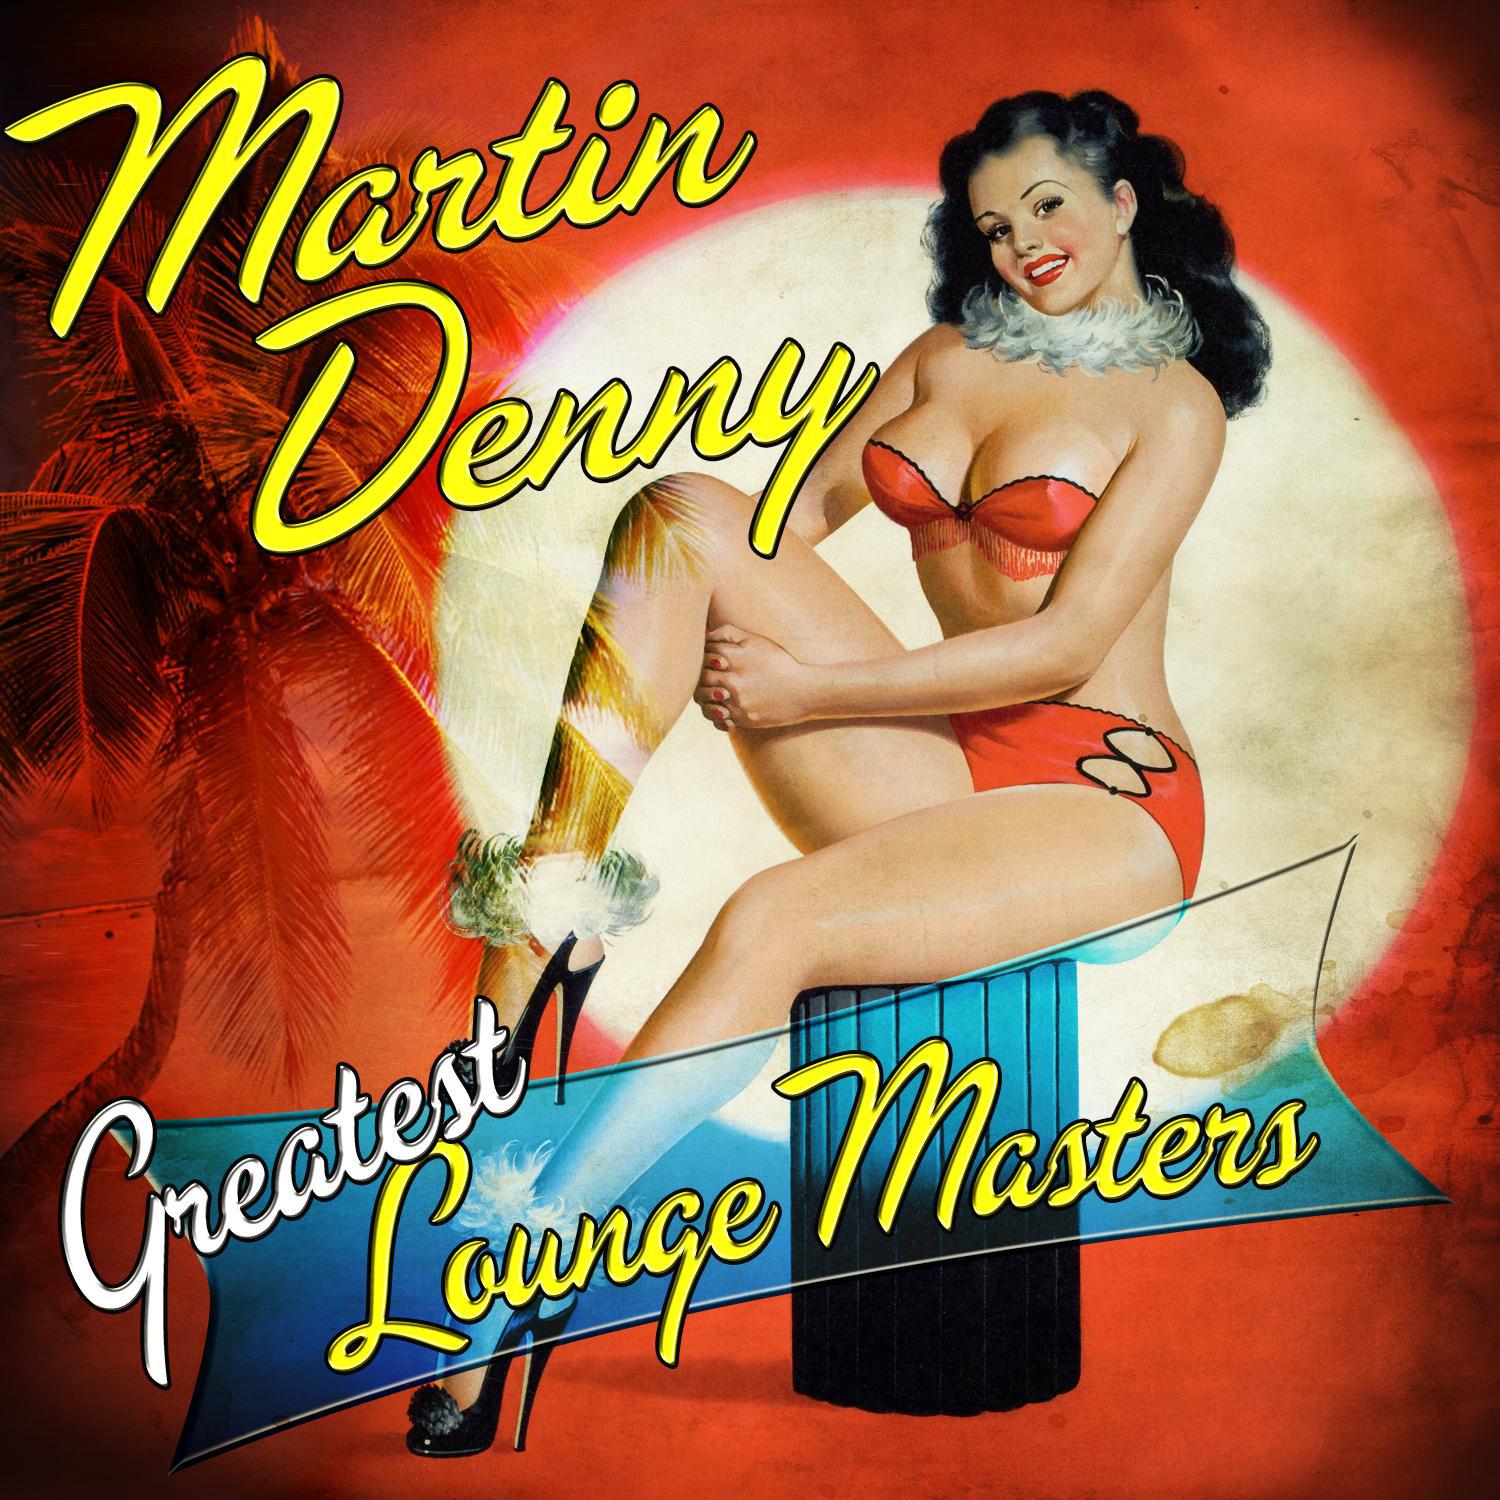 Greatest Lounge Masters